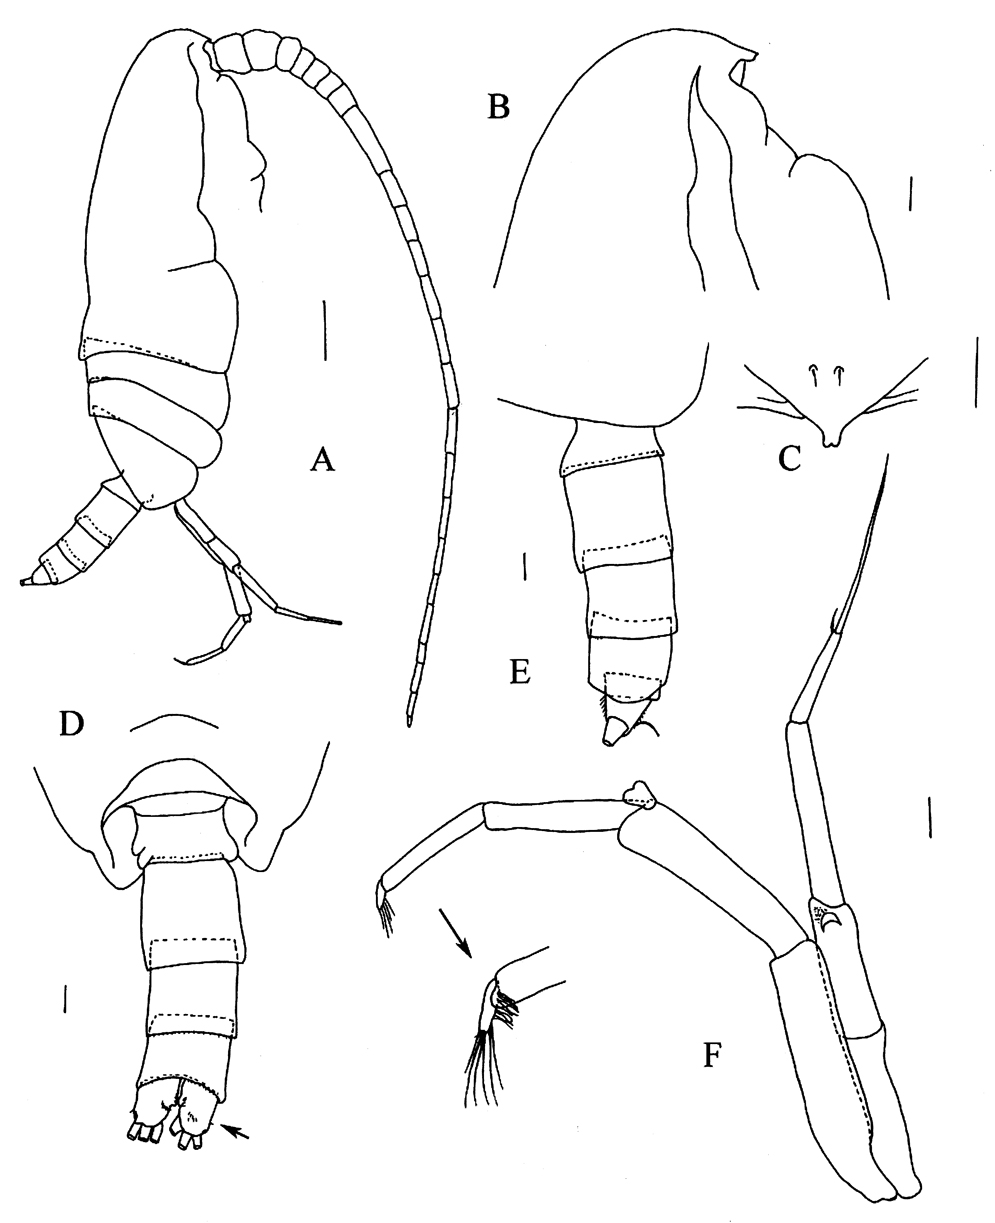 Species Xancithrix ohmani - Plate 6 of morphological figures